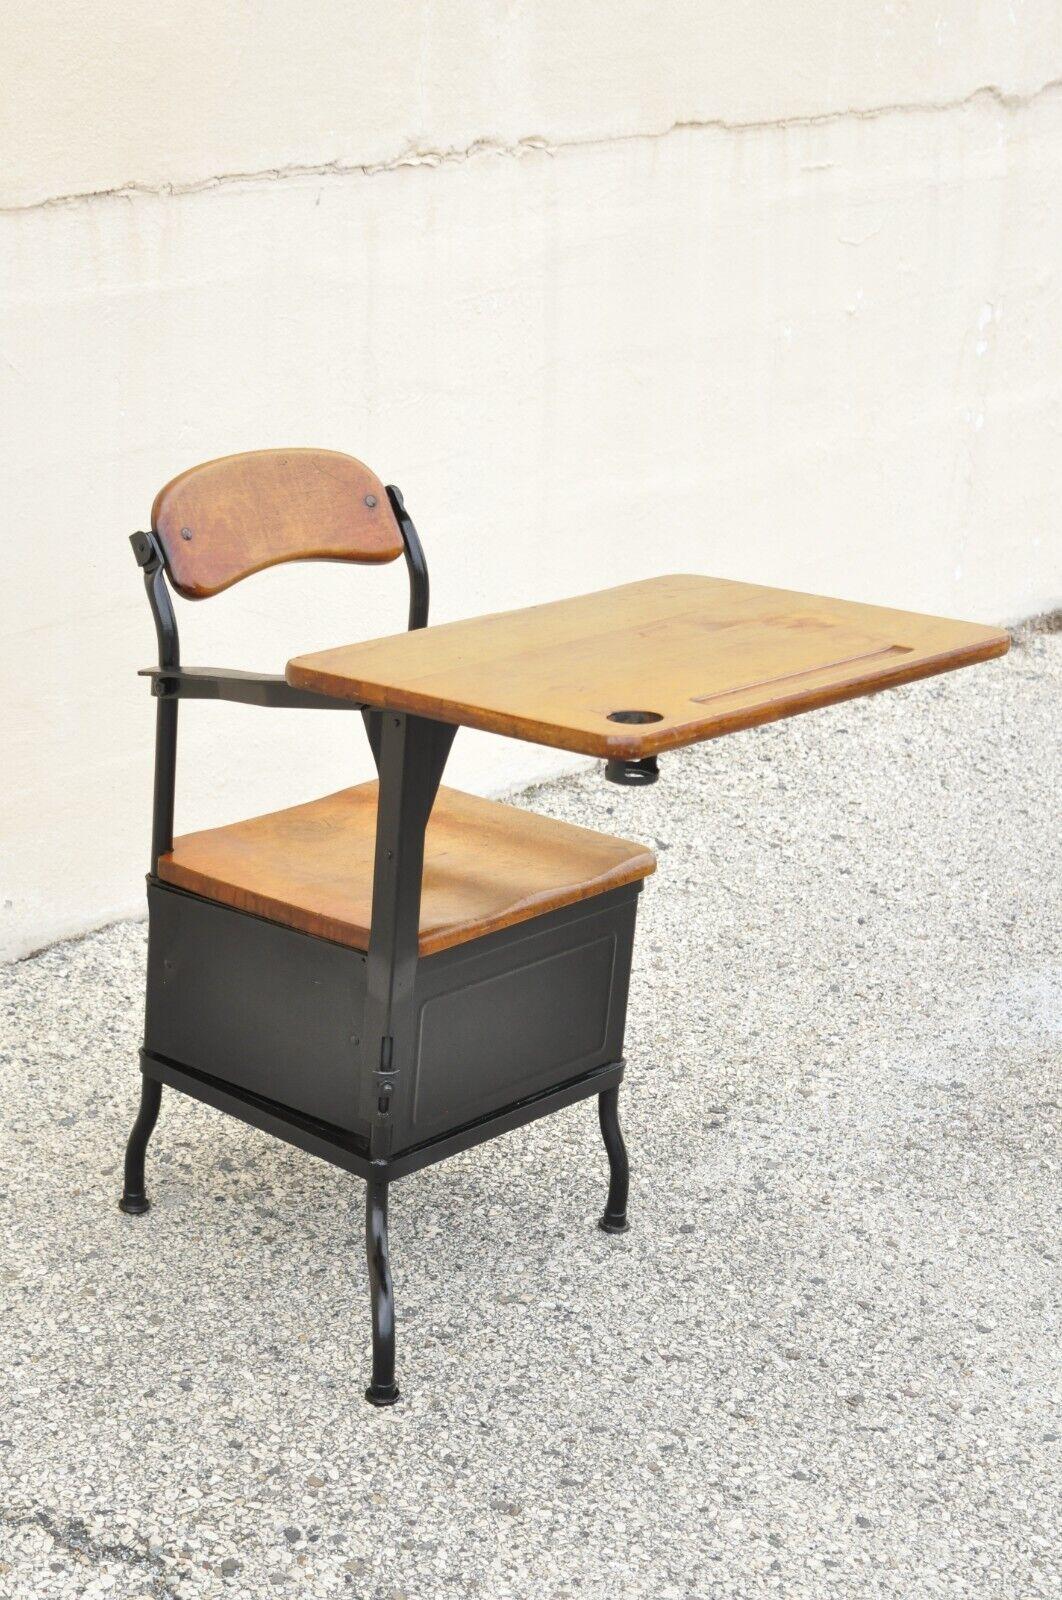 Antique American Industrial Iron and Maple Childs School Writing Desk For Sale 4